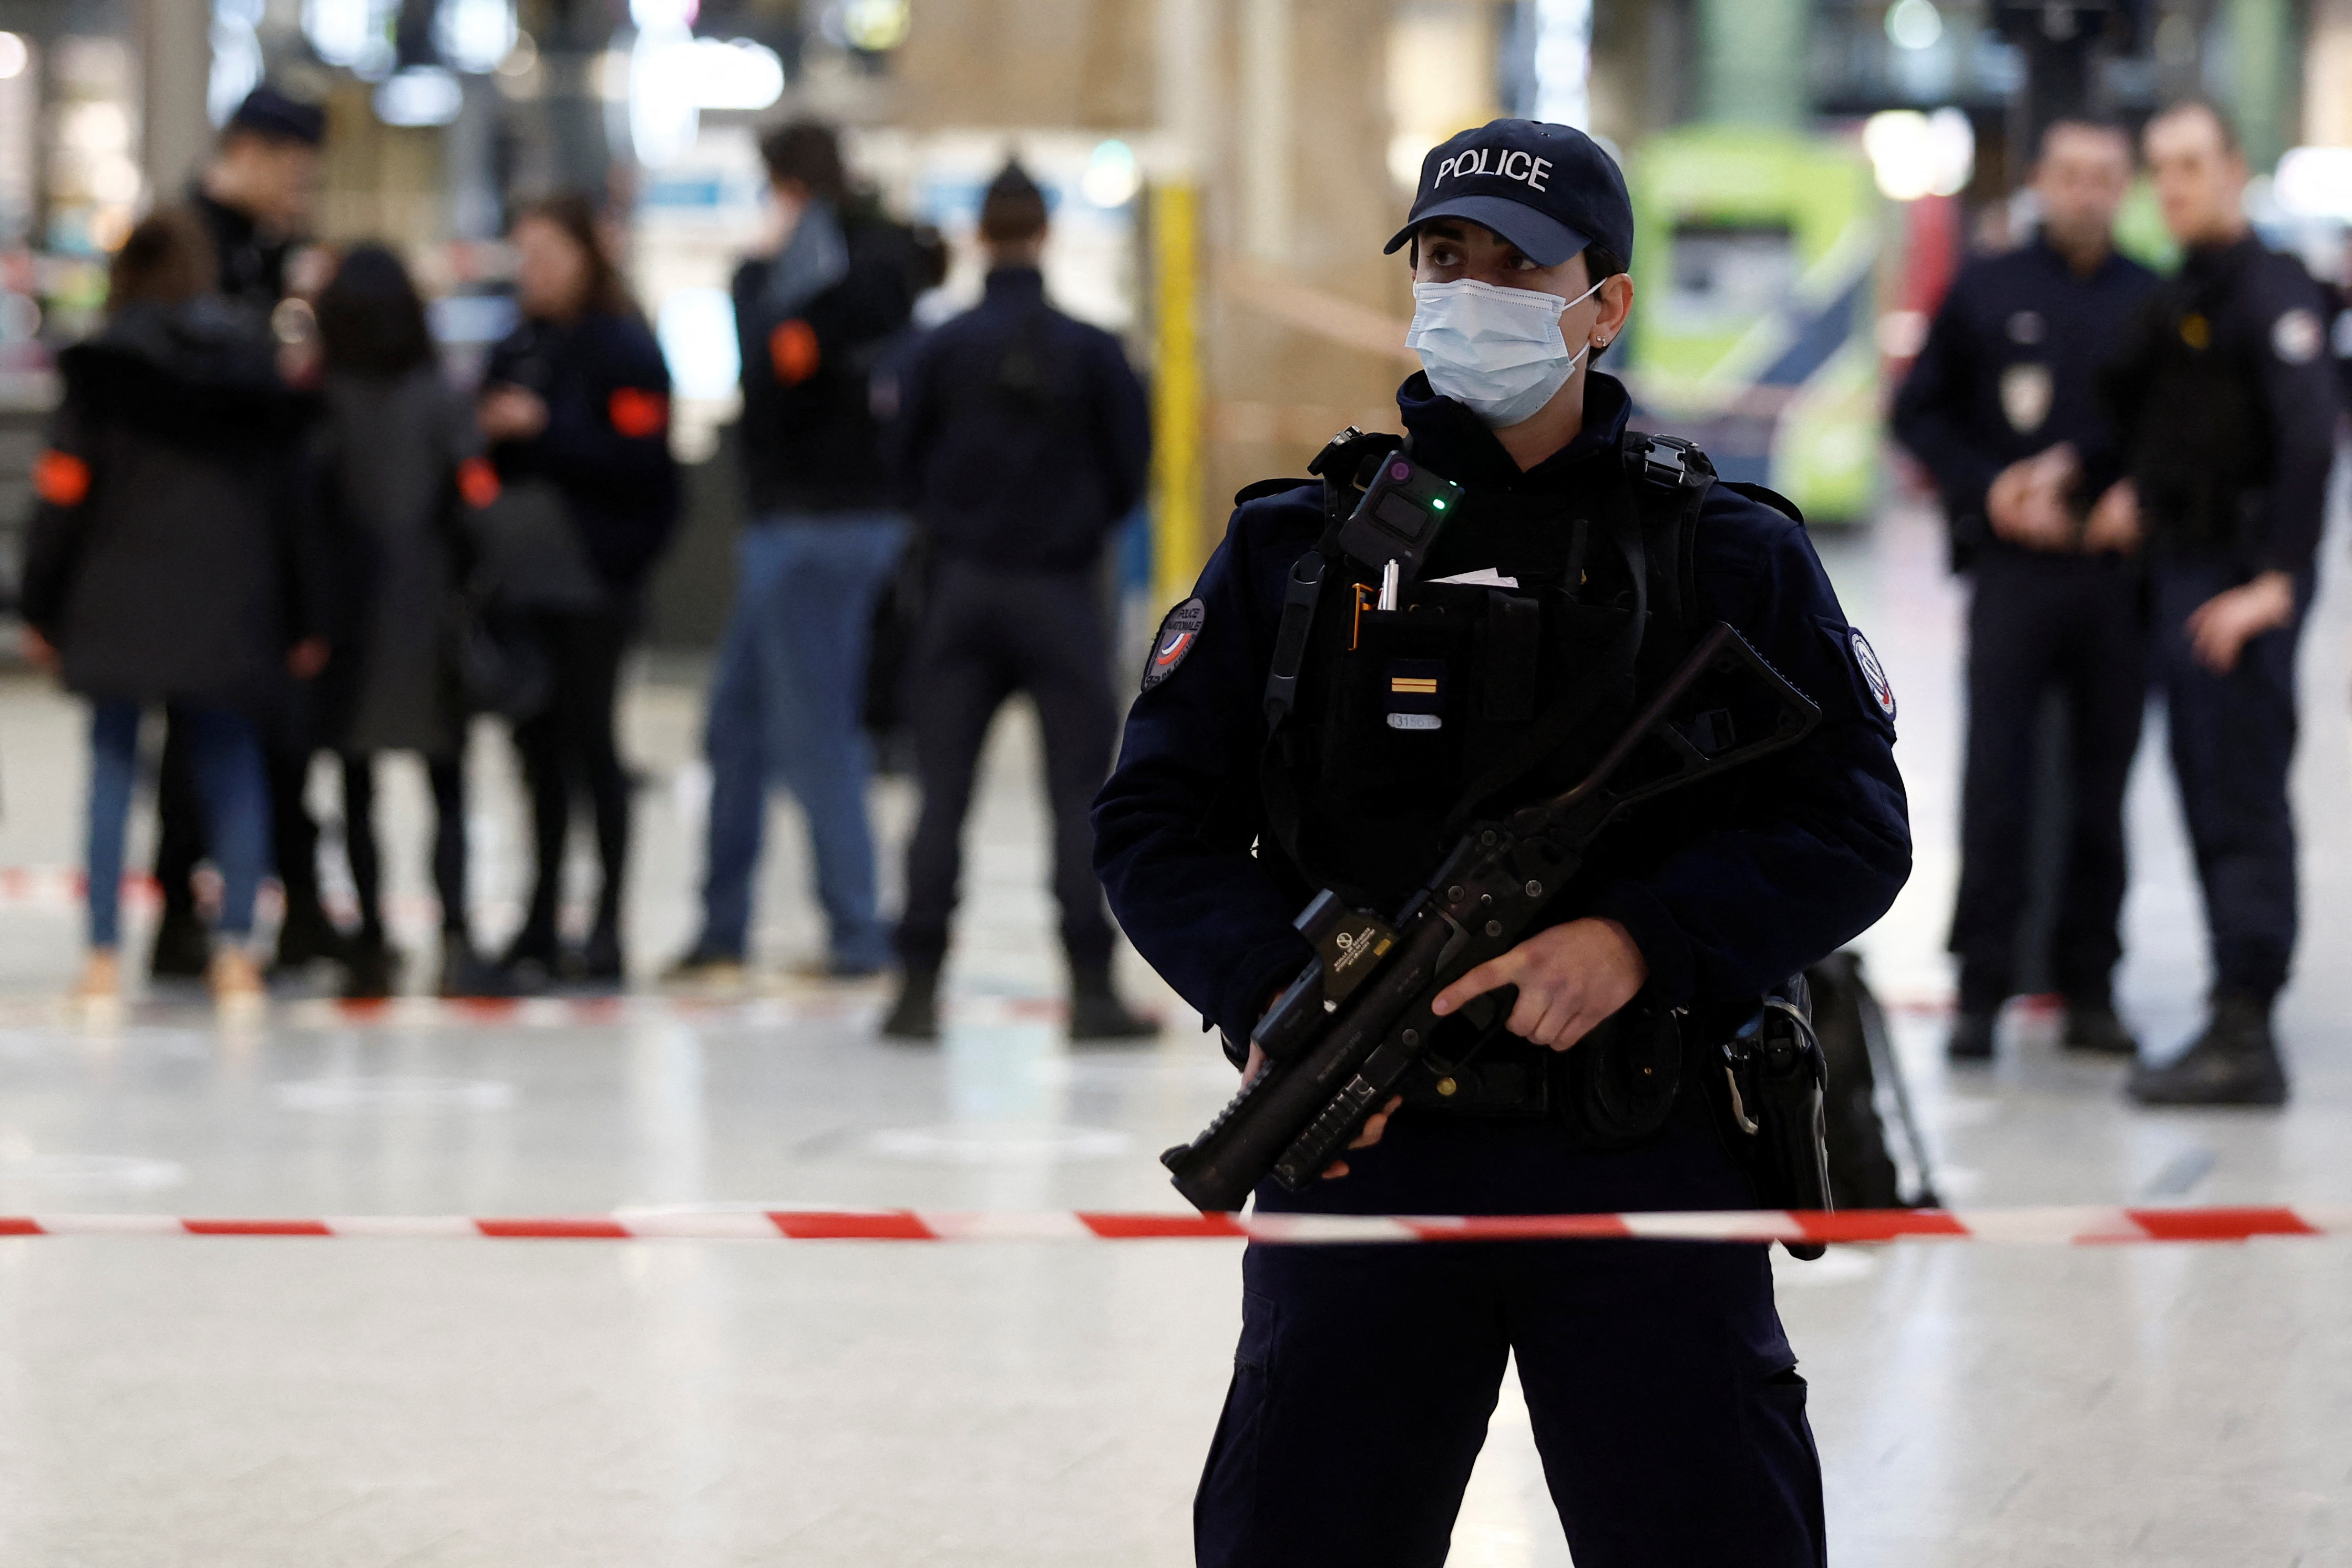 French police secure the area where a man with a knife wounded several people at the Gare du Nord train station in Paris. /Benoit Tessier/Reuters